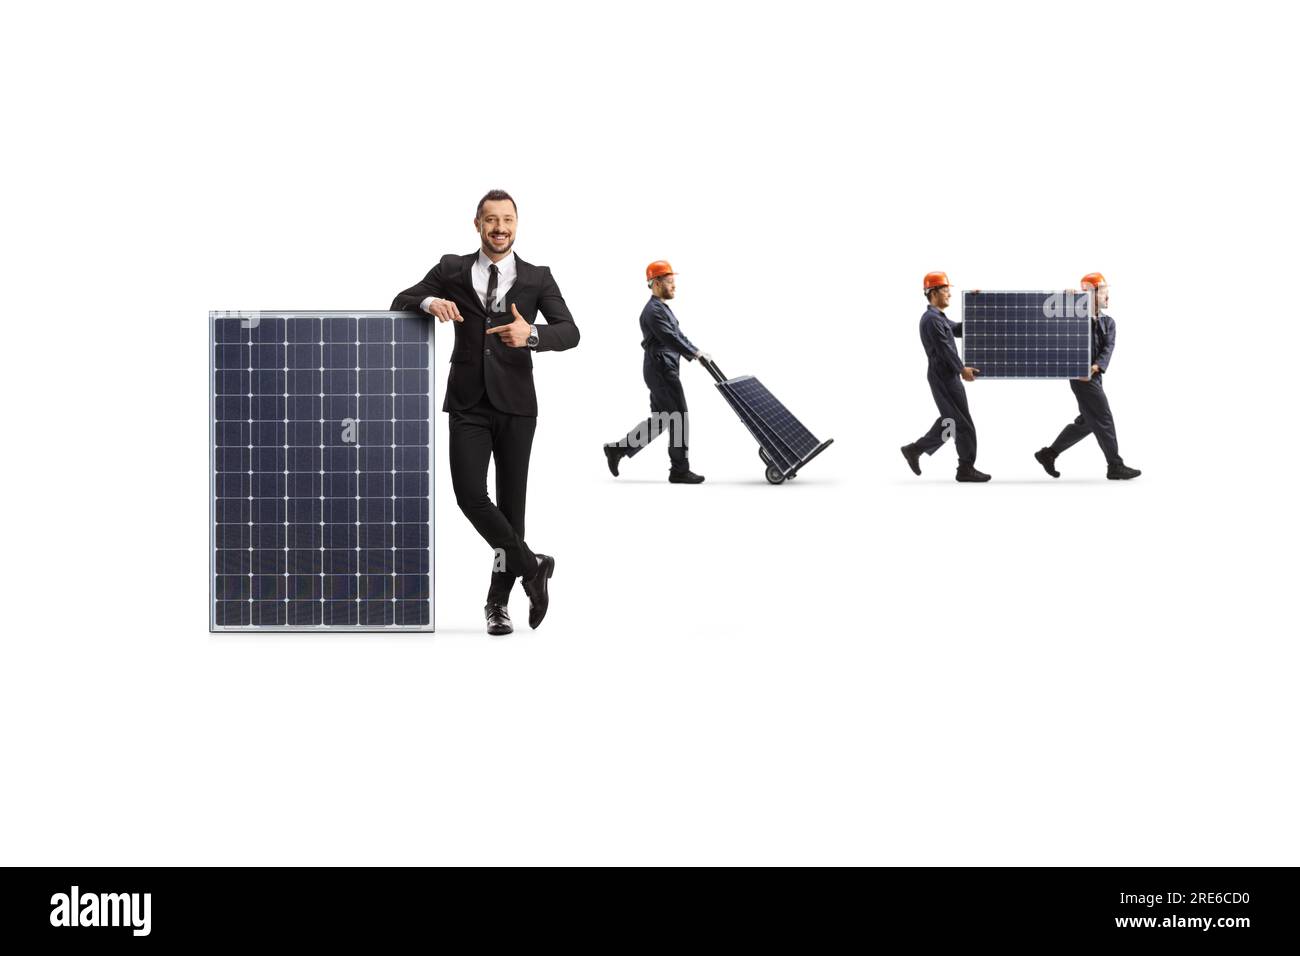 Businessman pointing at a panel and workers carrying photovoltaic panels isolated on white background Stock Photo